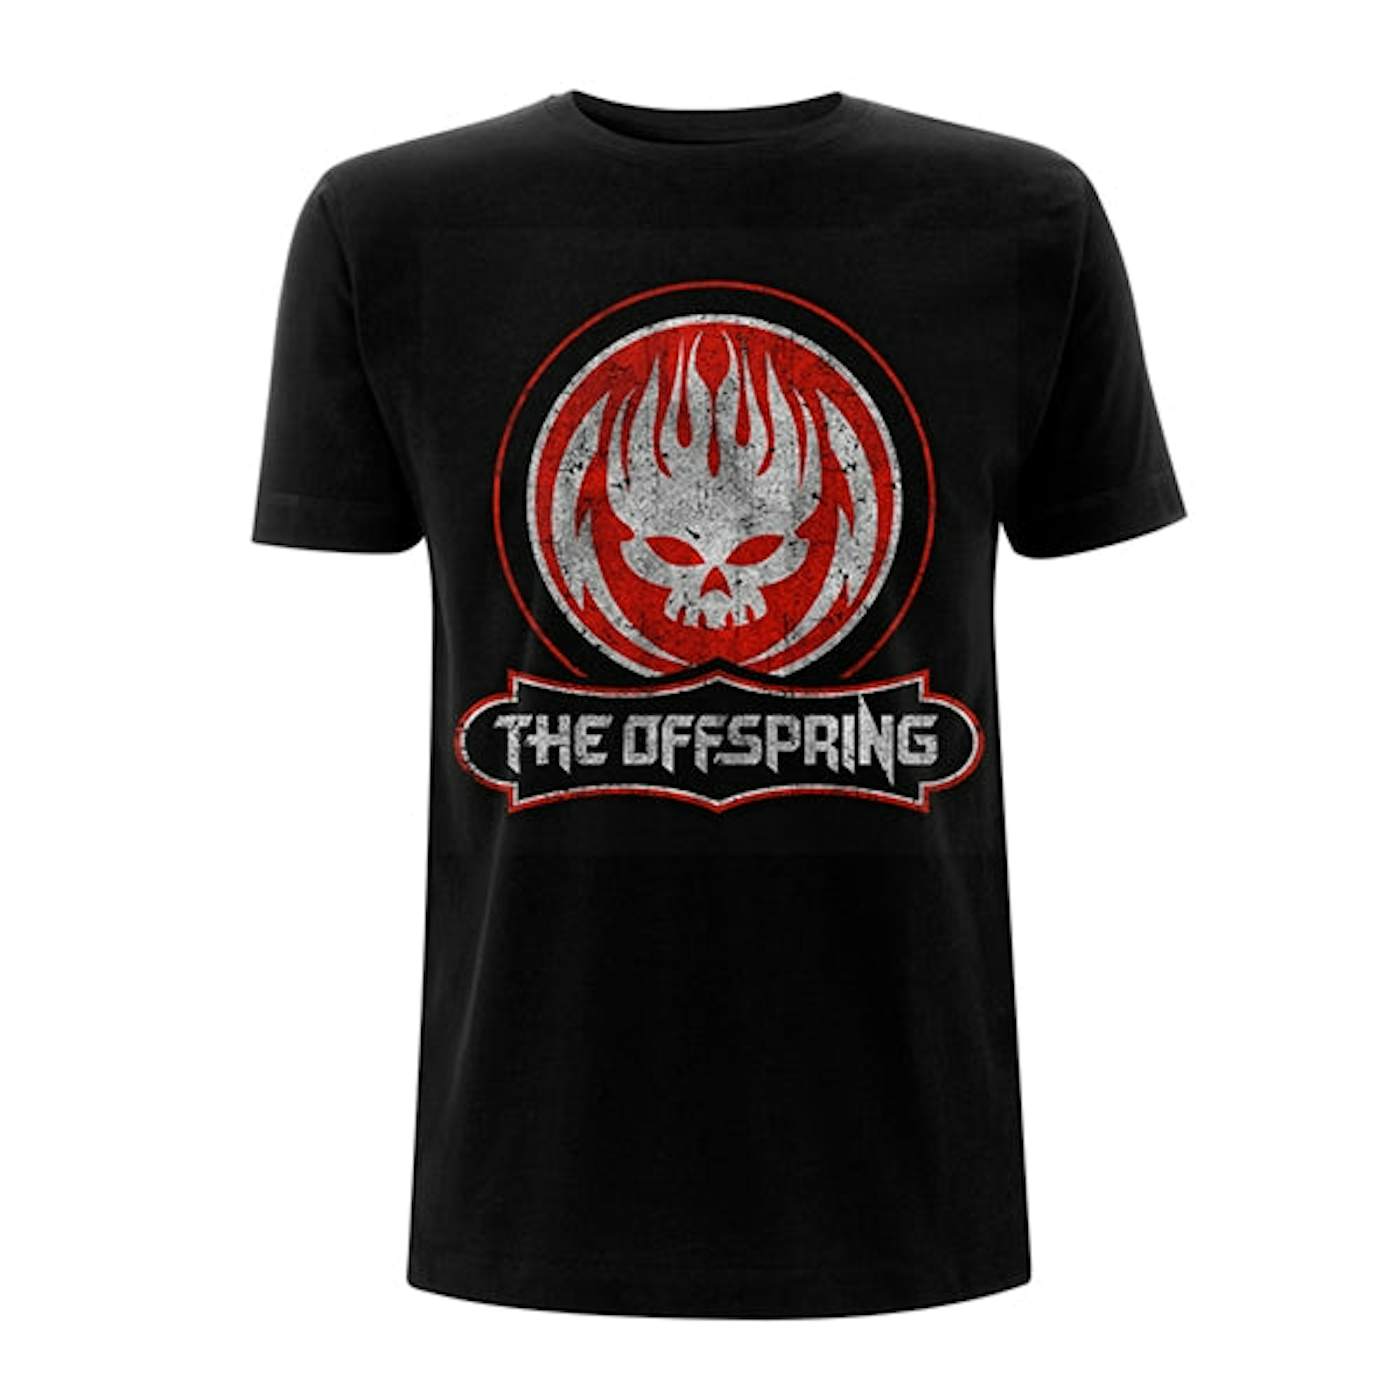 The Offspring T Shirt - Distressed